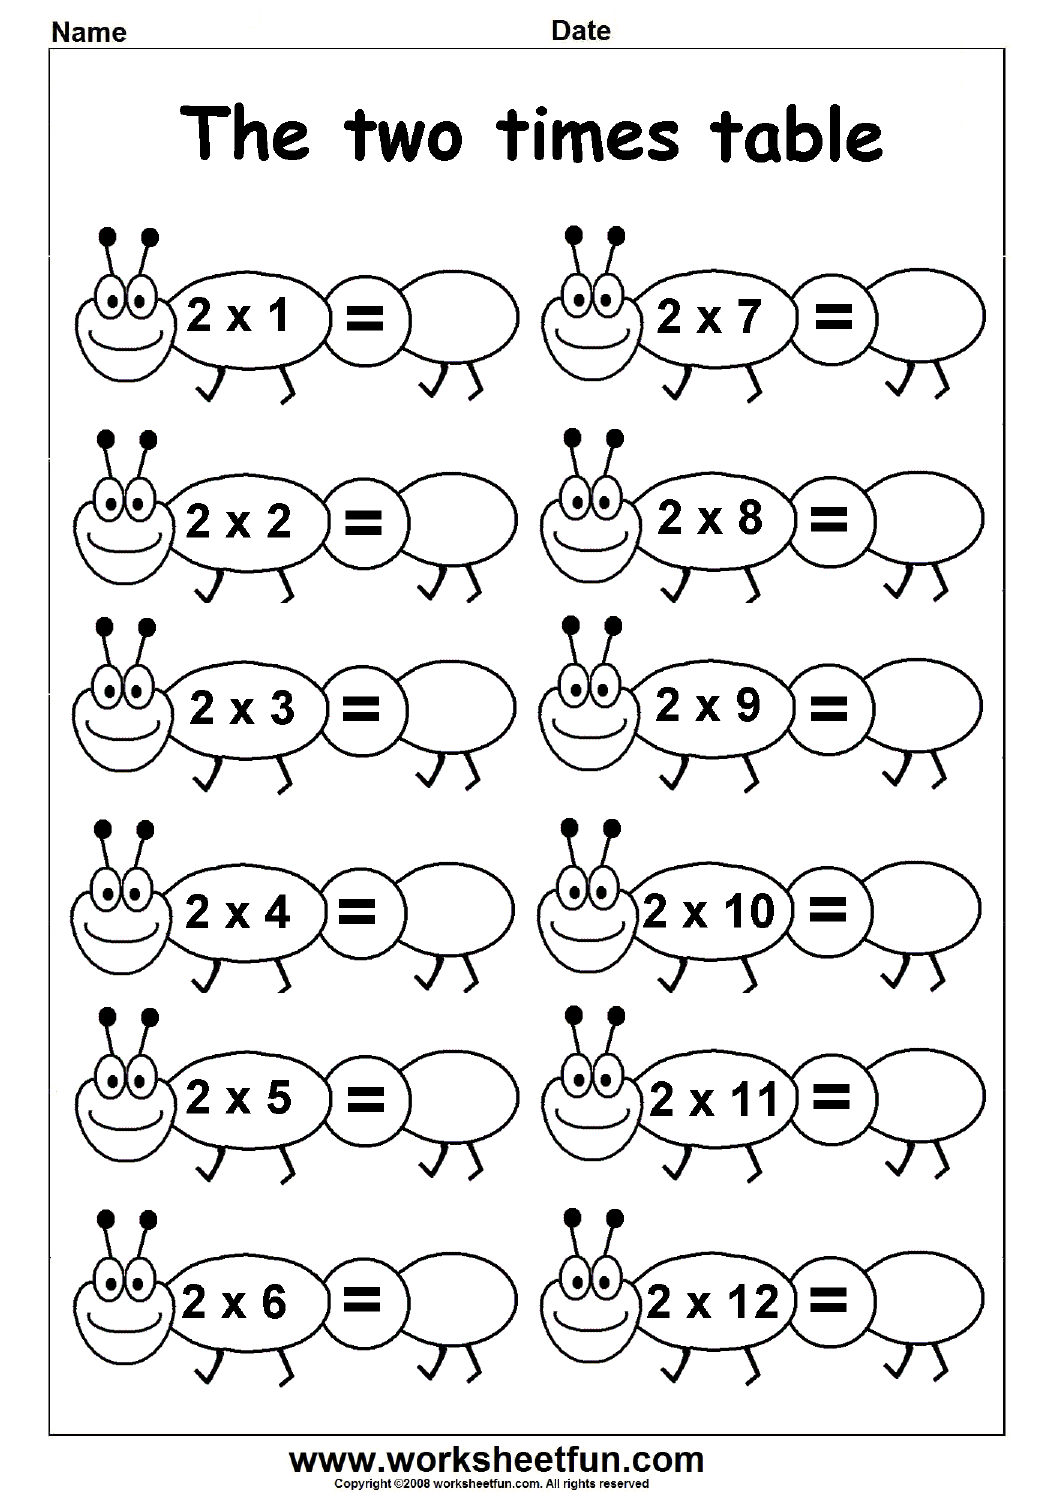 Multiplication Times Tables Worksheets – 11, 11, 11, 11, 11 & 11 Times Intended For 2 Times Table Worksheet